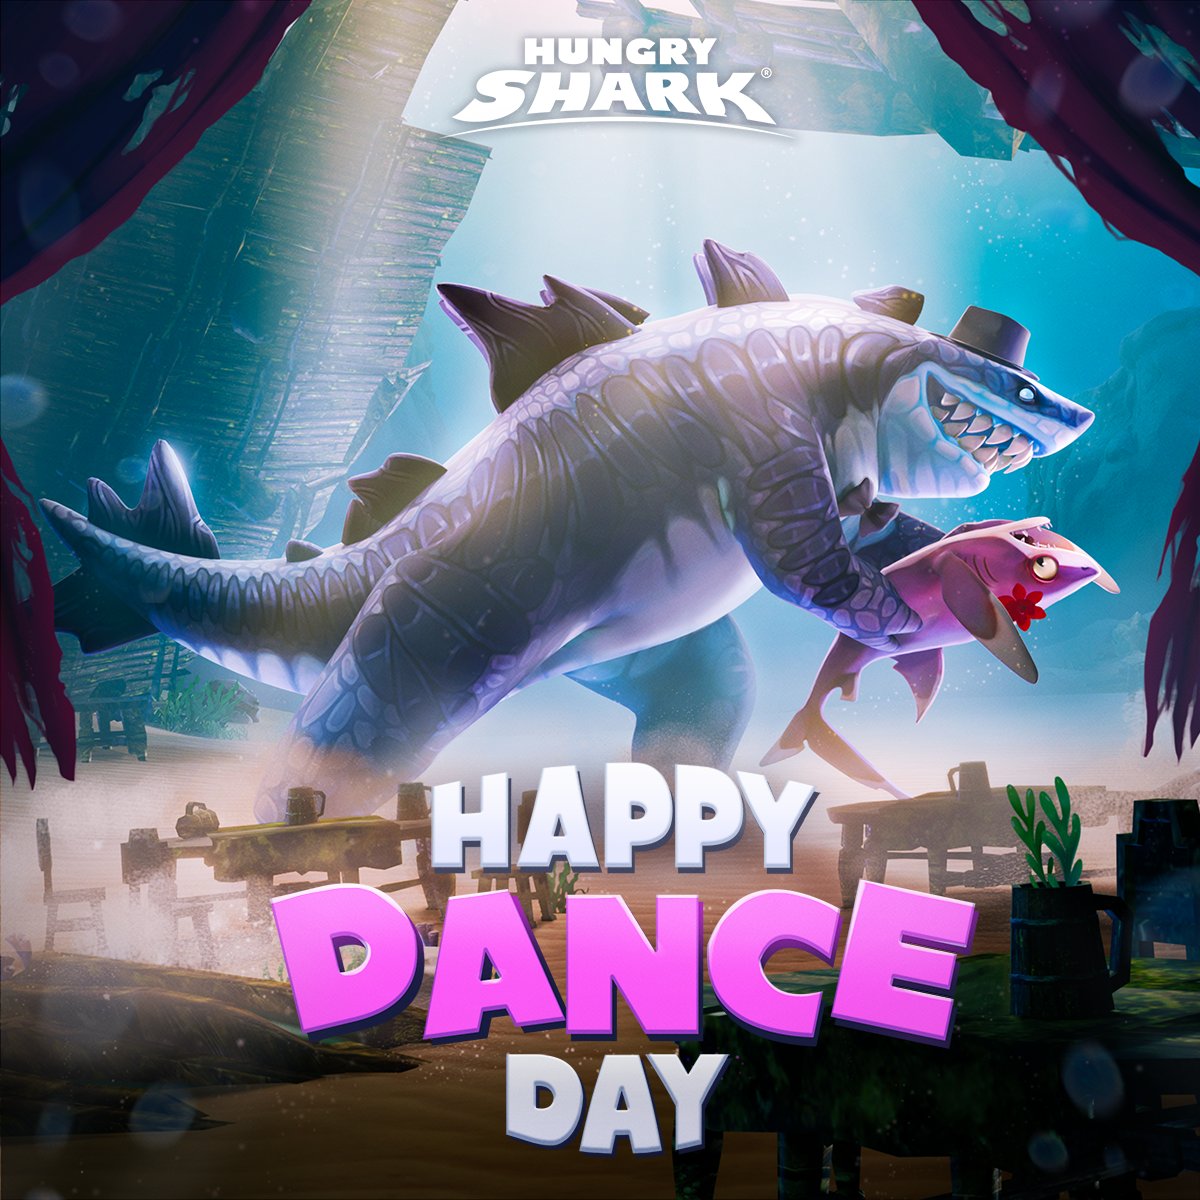 Happy #InternationalDanceDay ! 🎶 Dive into the rhythm of the waves and show us your best underwater moves in #HungryShark! 🦈🌊